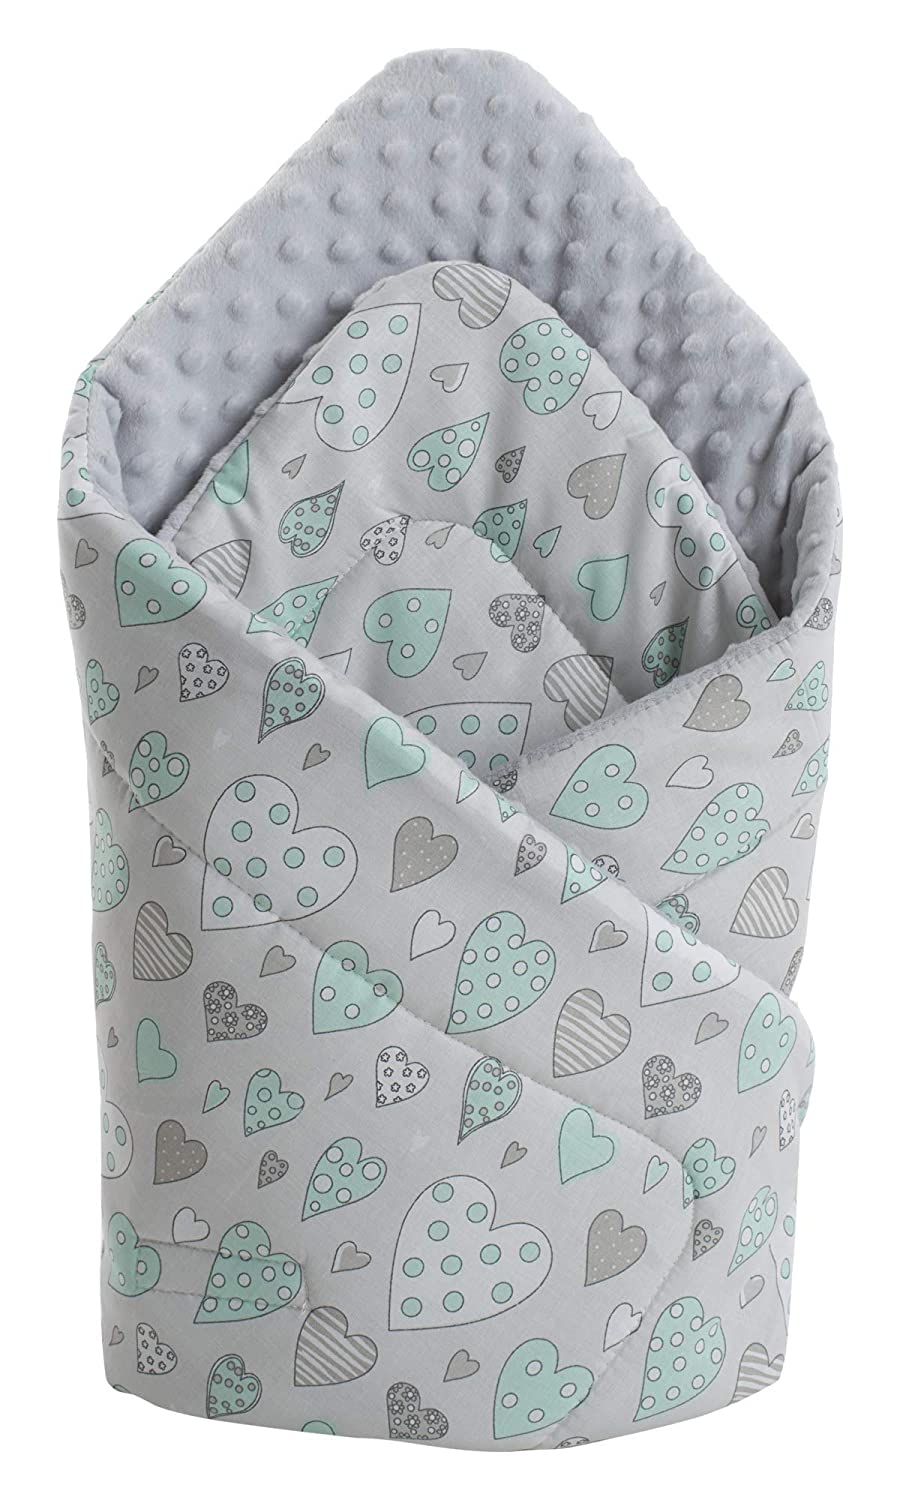 Medi Partners Swaddling Blanket 100% Cotton 75 x 75 cm Baby Pillow Double Sided Soft All Year Round Multifunctional Anti-Allergic Babies Medi Partners (Mint Hearts with Grey Minky)